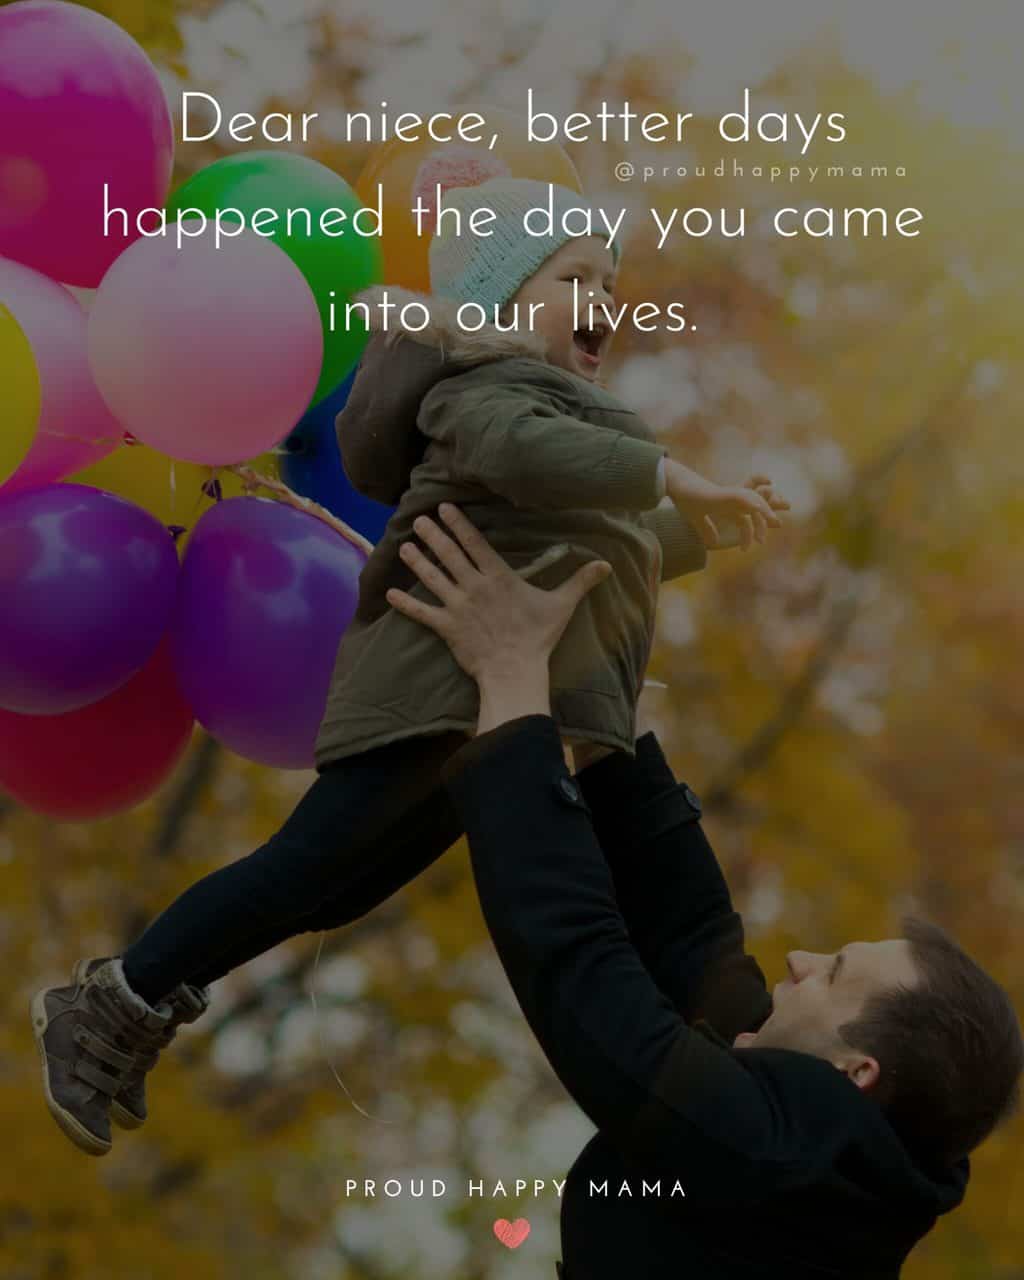 Niece Quotes - Dear niece, better days happened the day you came into our lives.